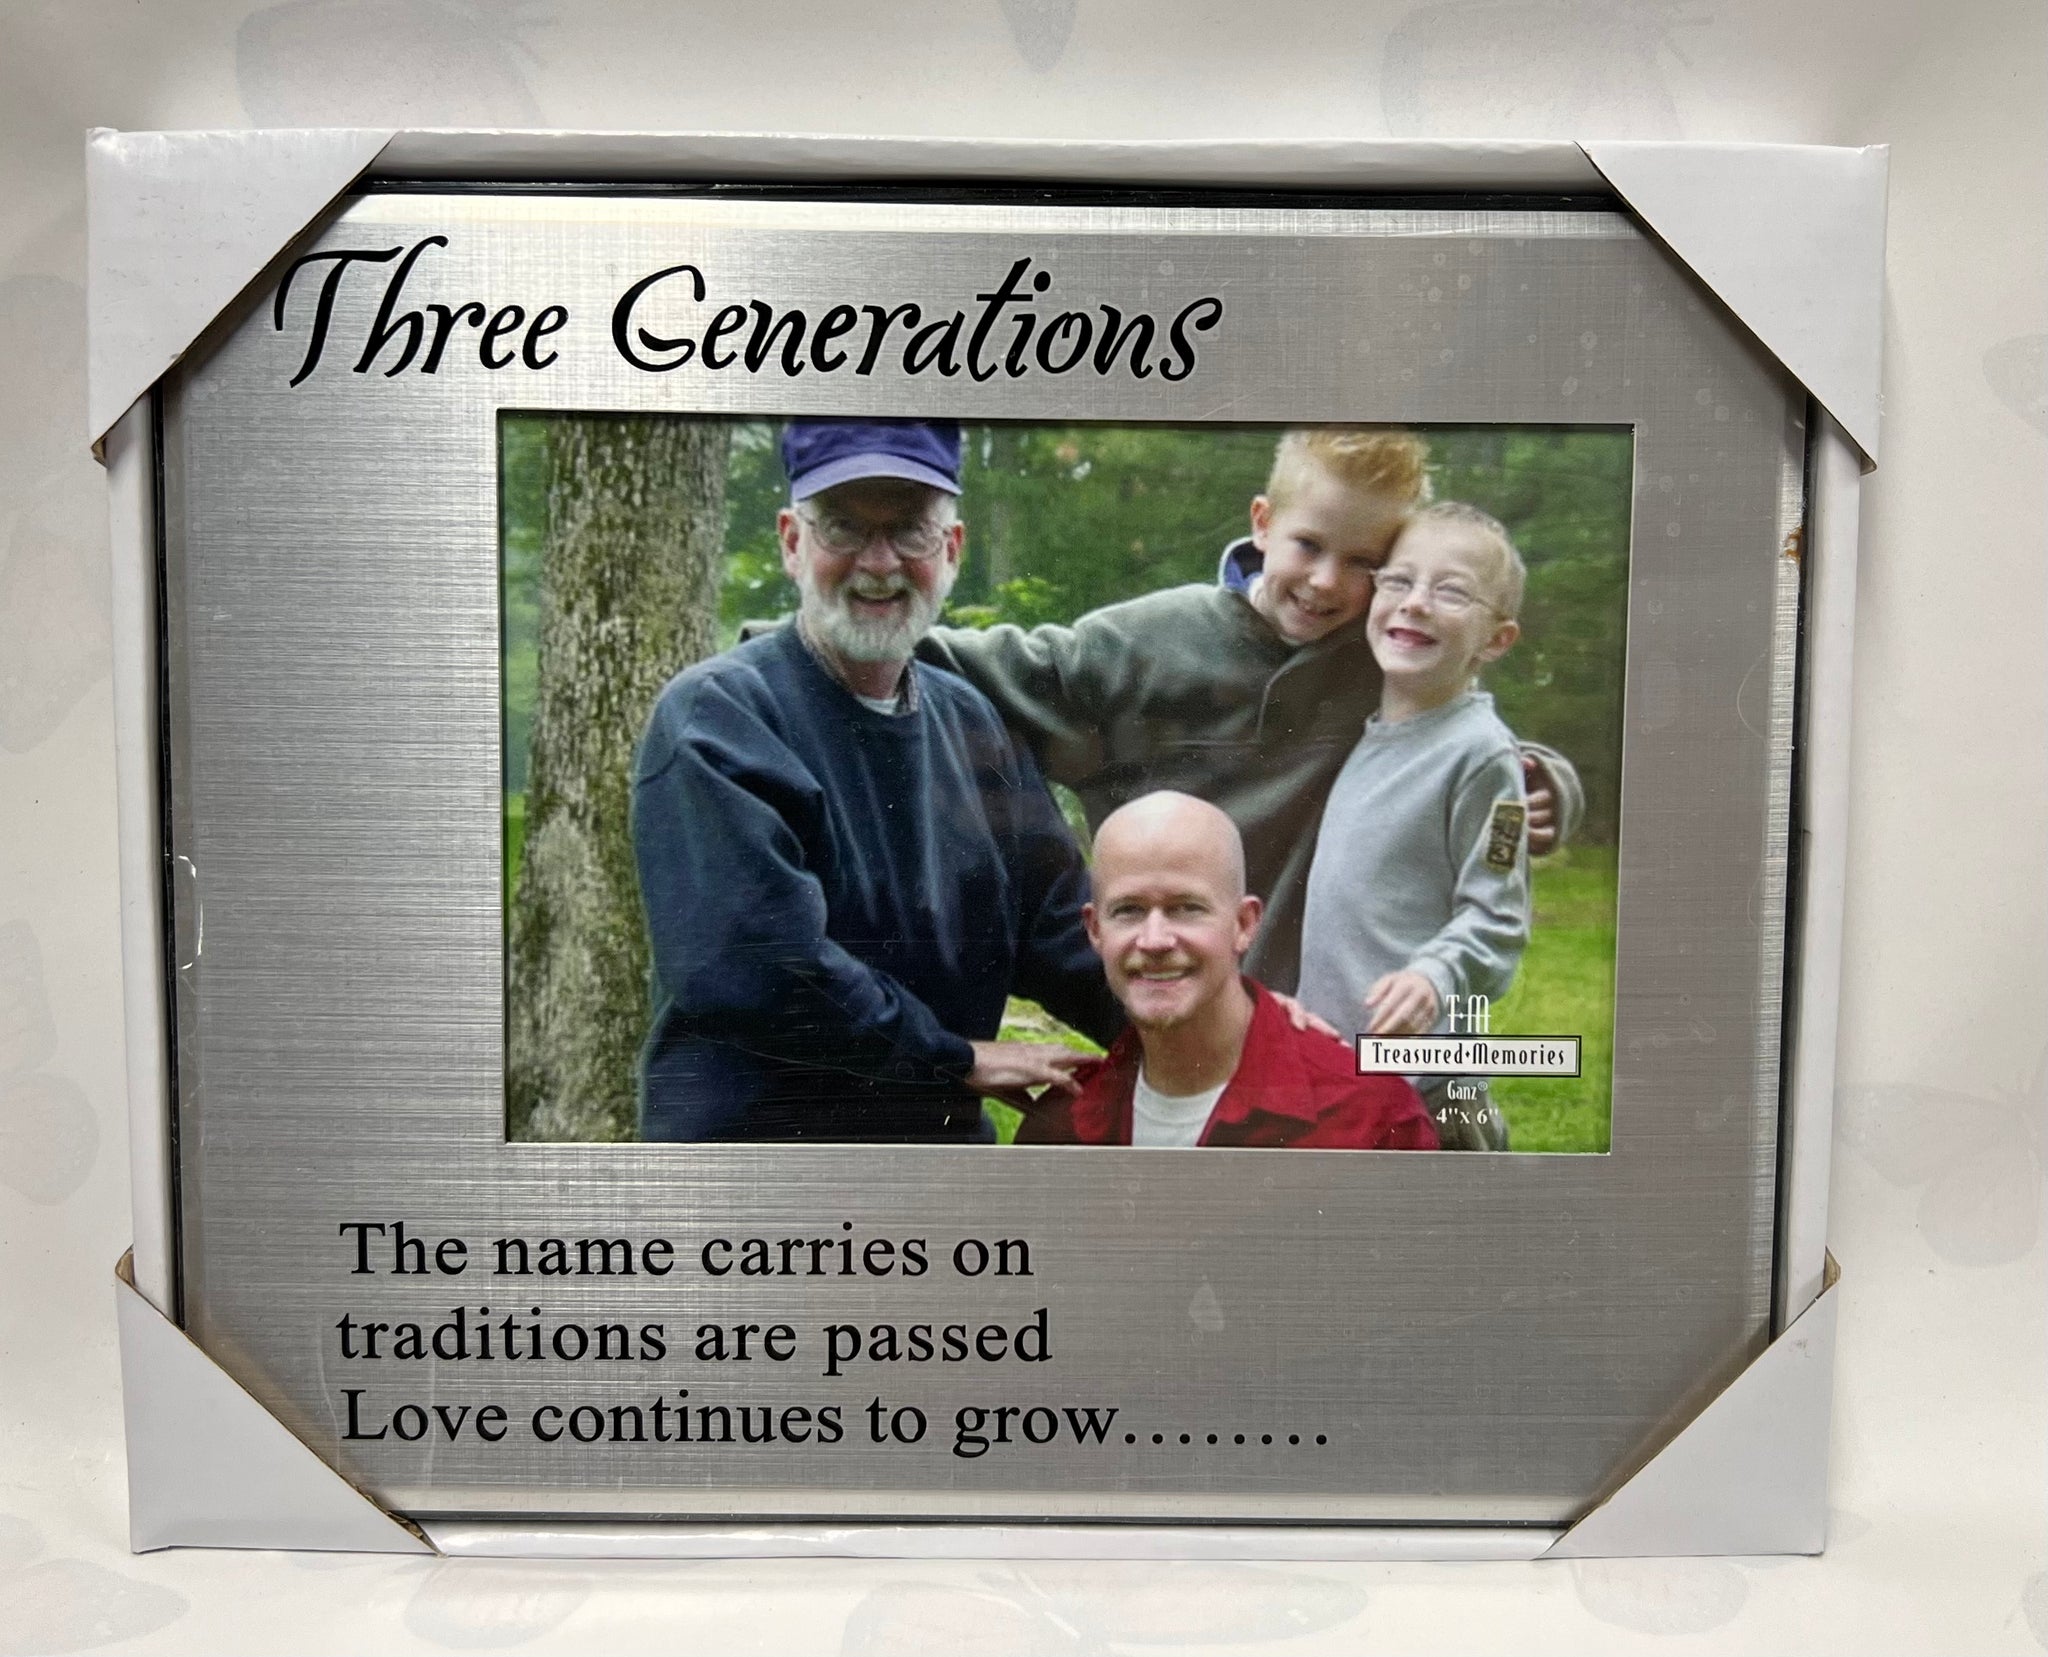 Generations Picture Frame - Three Generations